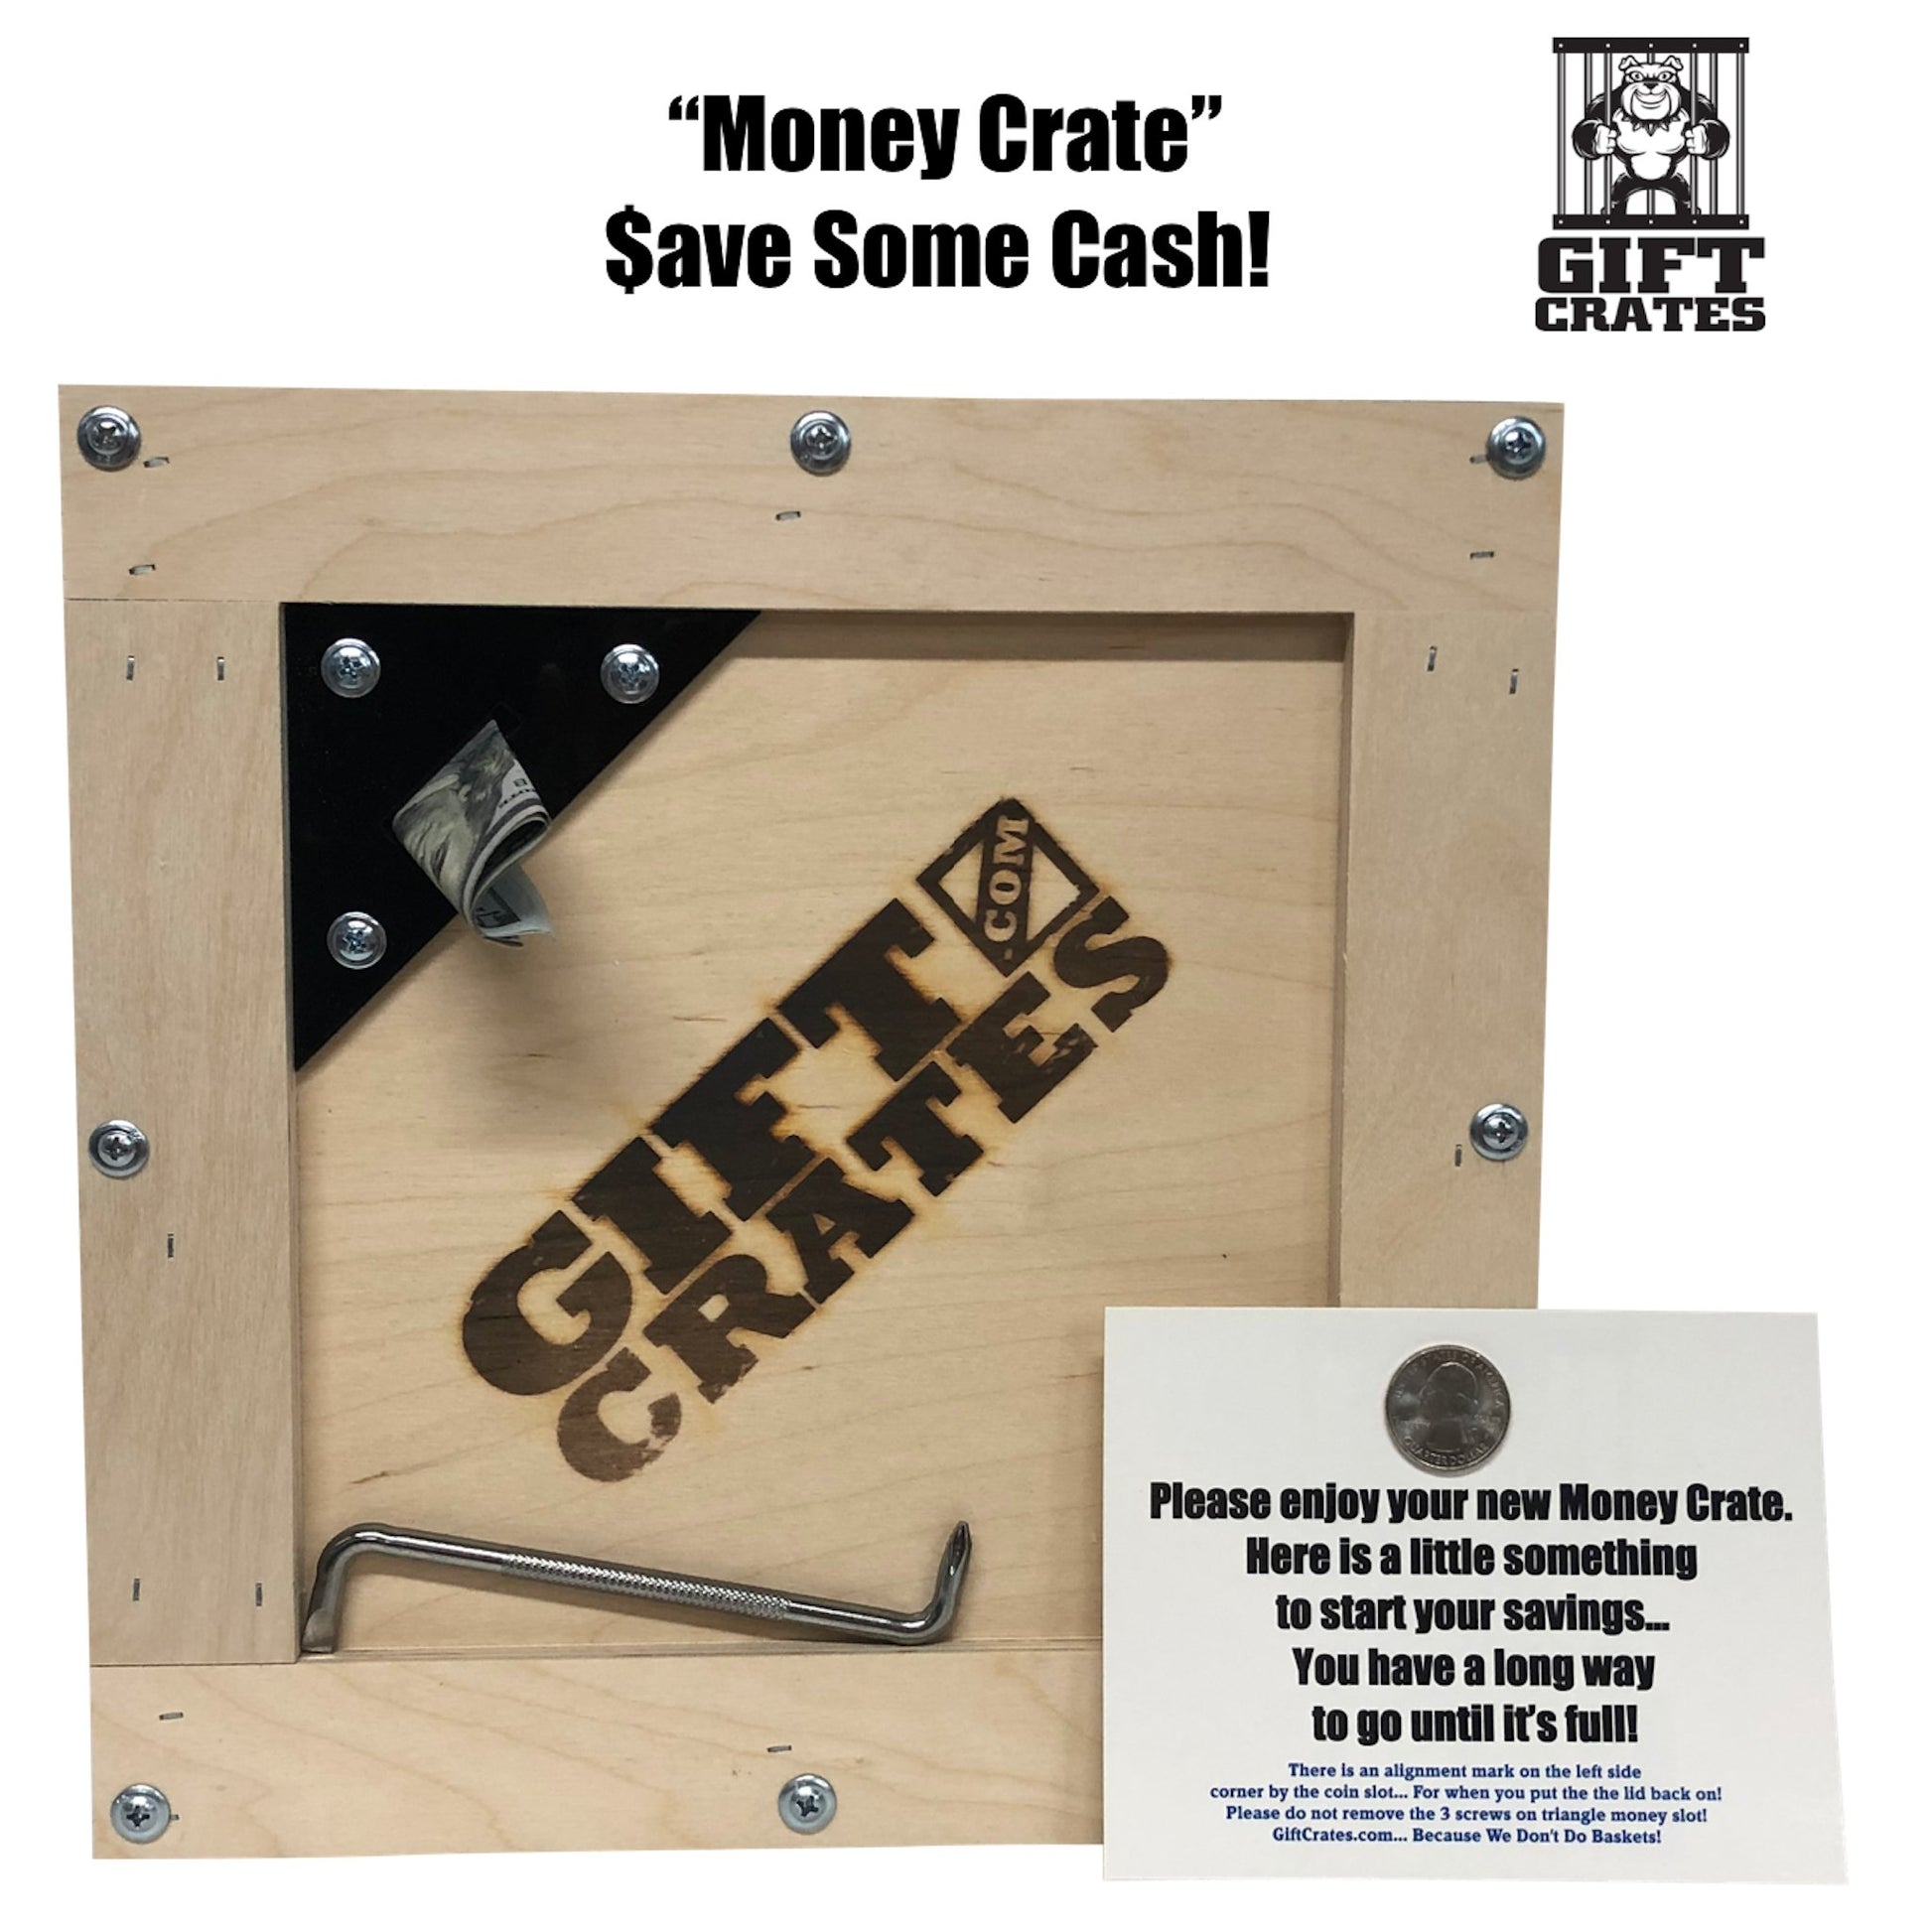 Bogey Golf Crate - Gift Crates